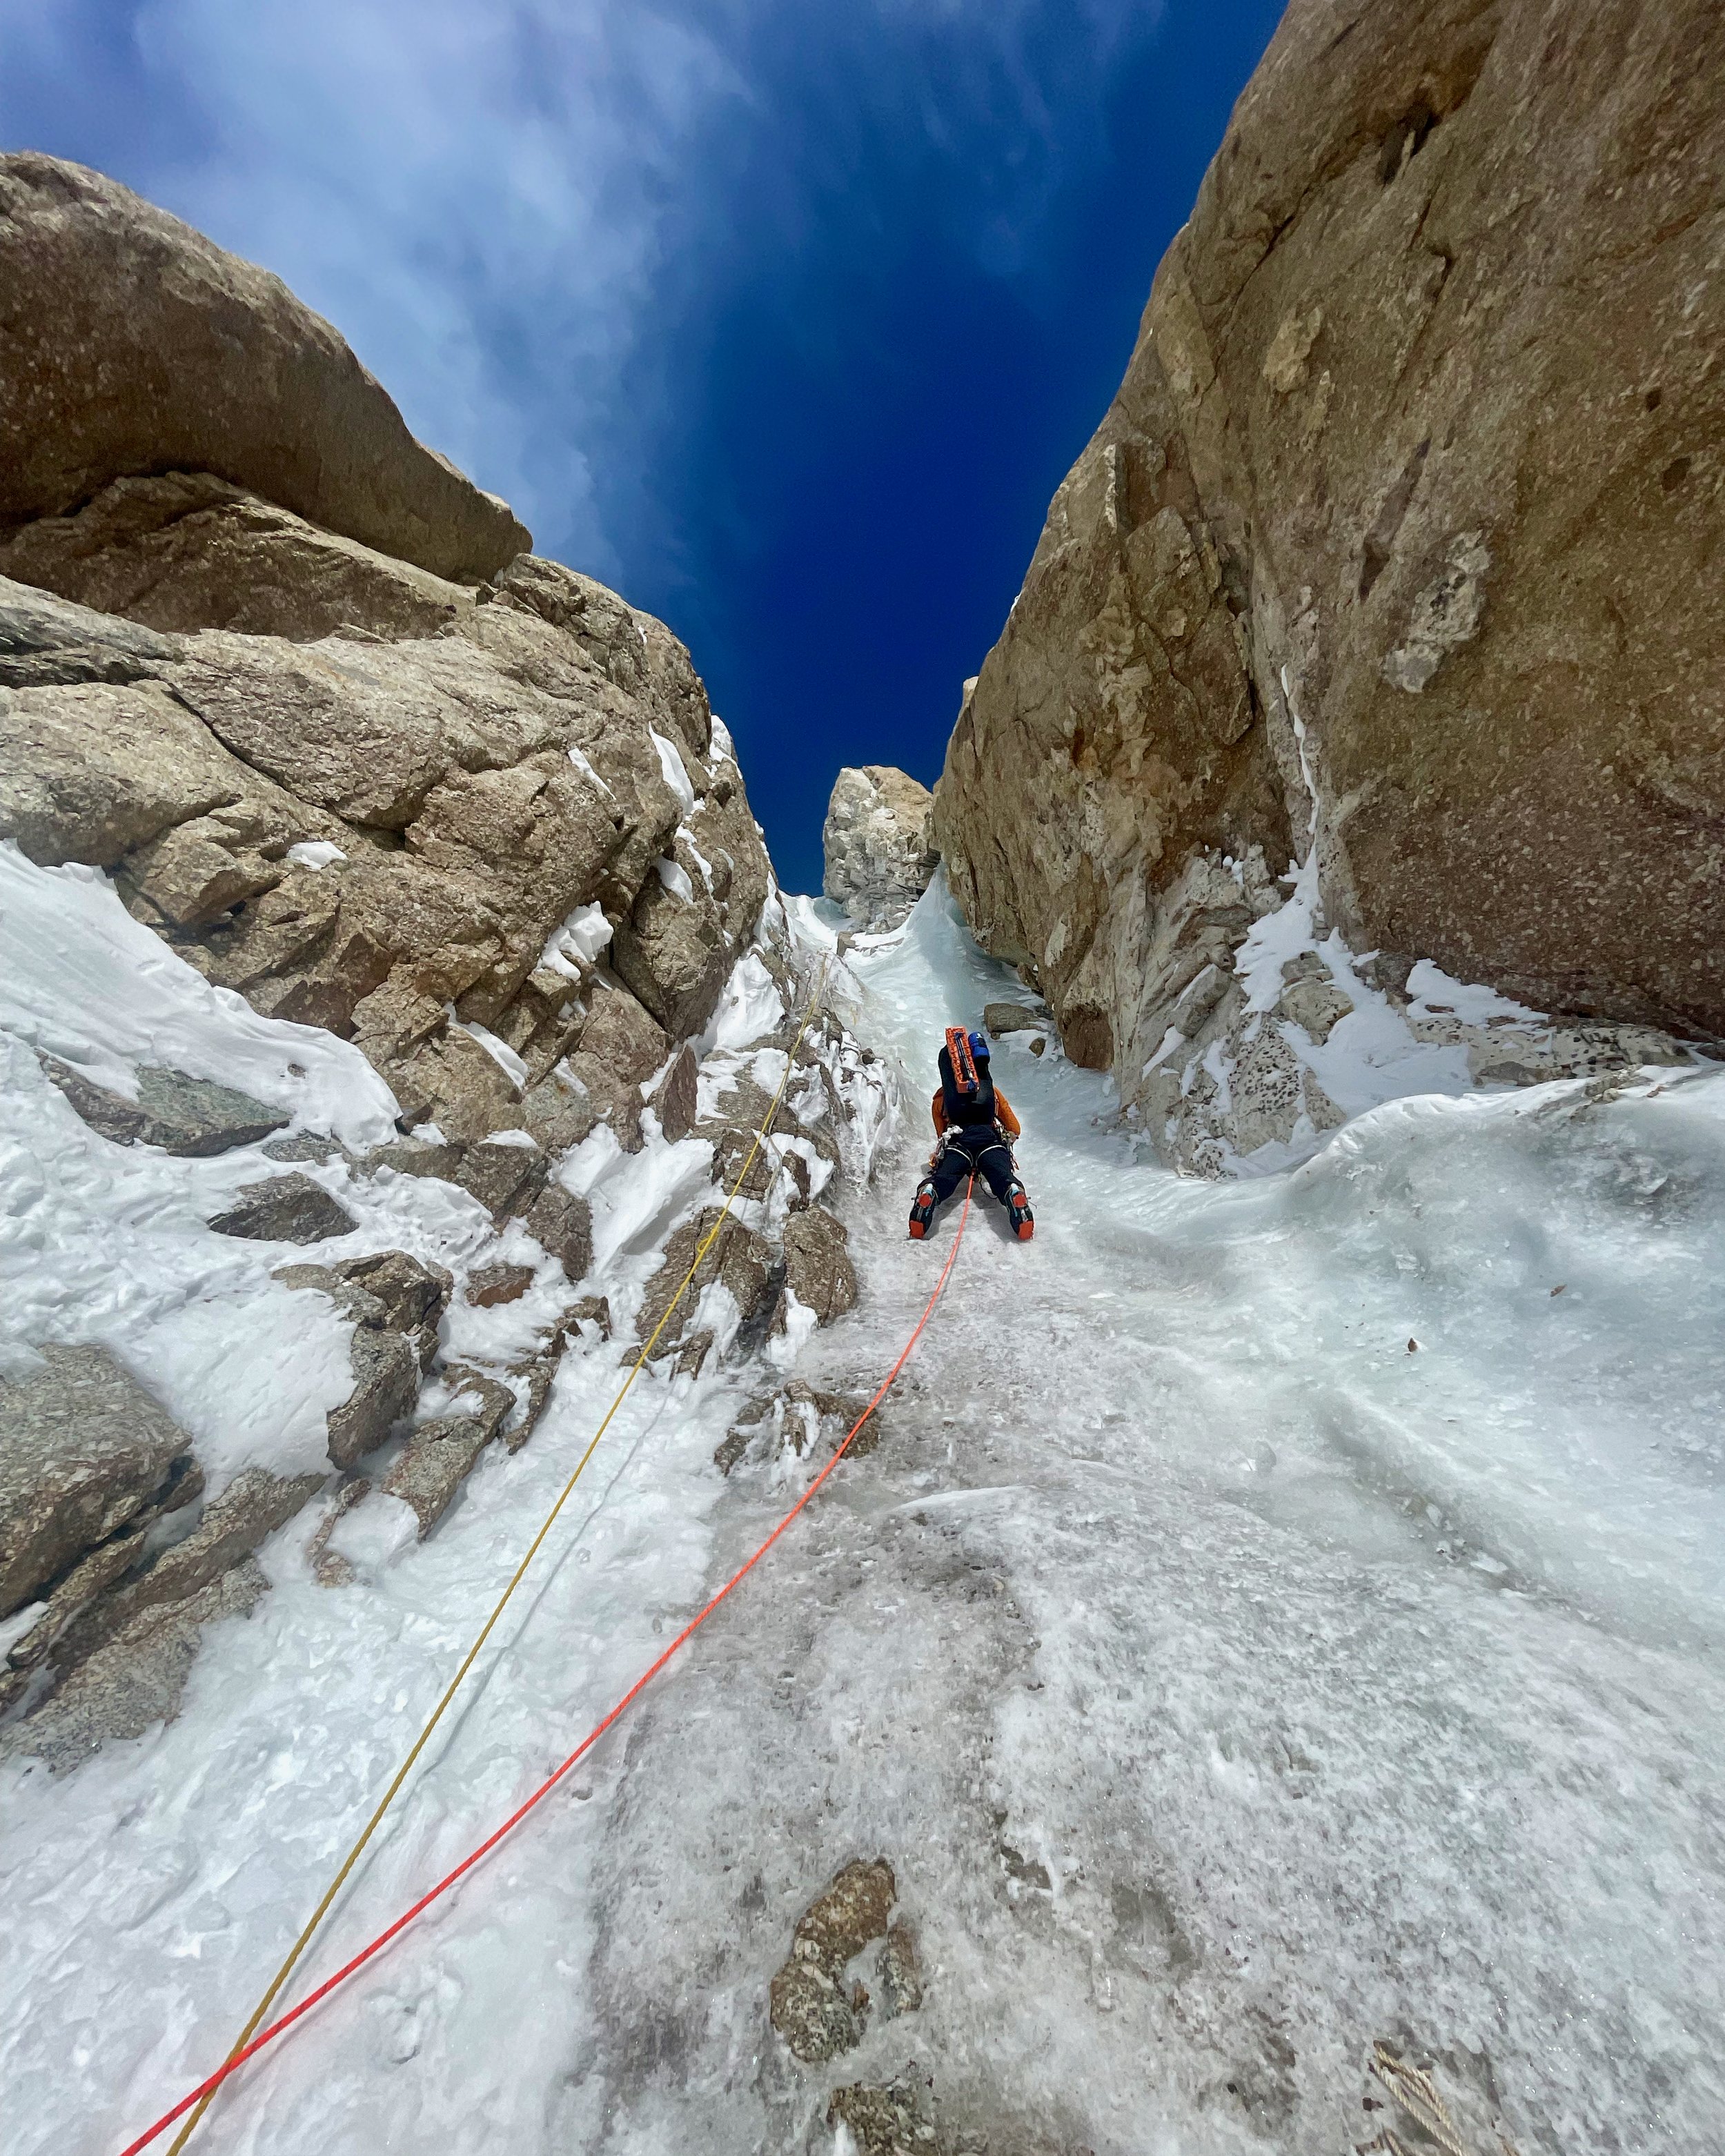 Austin leading the AI4 pitch in the Japanese Couloir